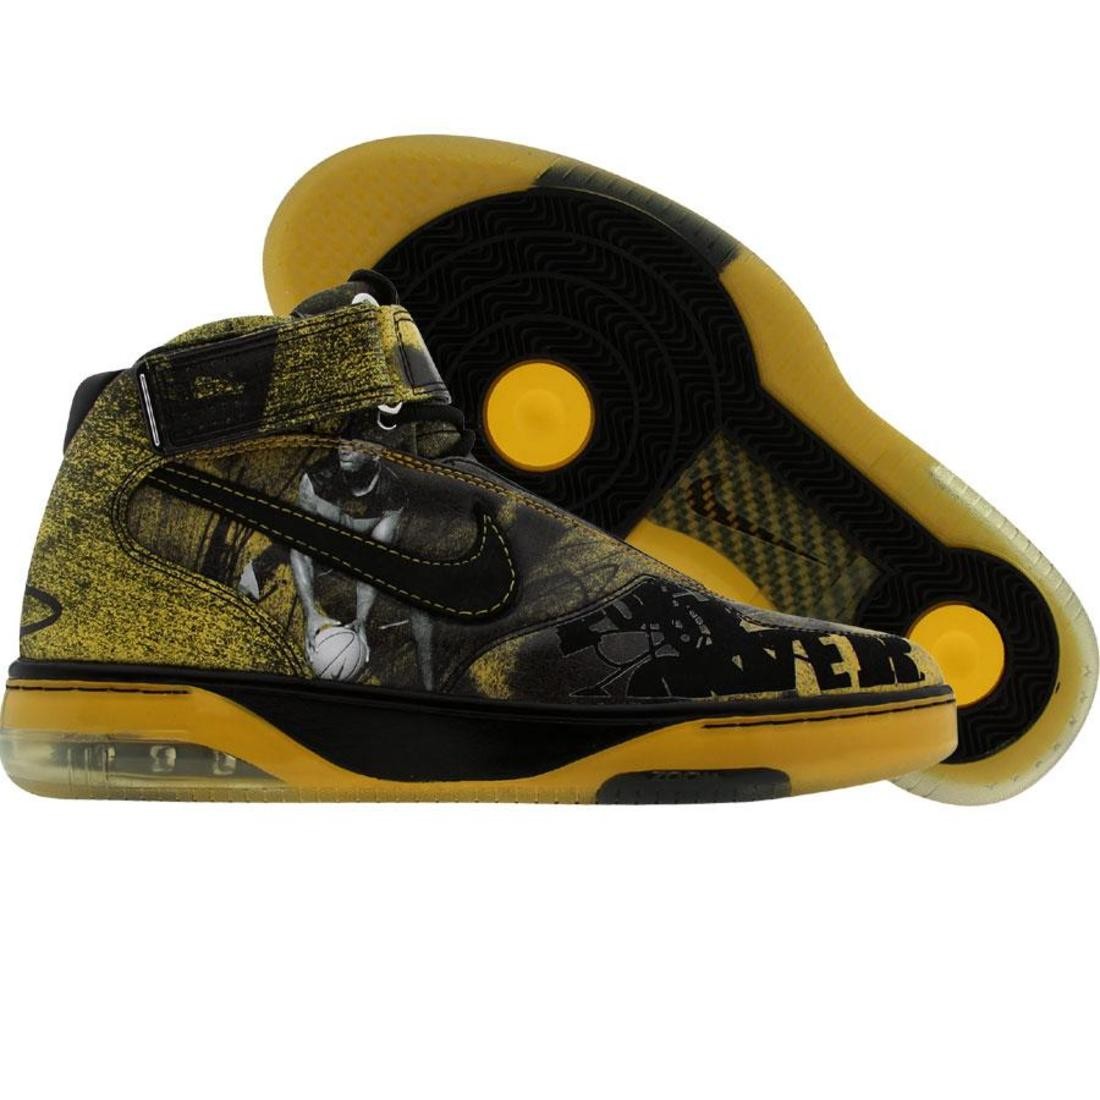 Nike Air Force 25 6 Pack 2007 NBA All Star Release - Jermaine ONeal Edition (varsity maize / black)